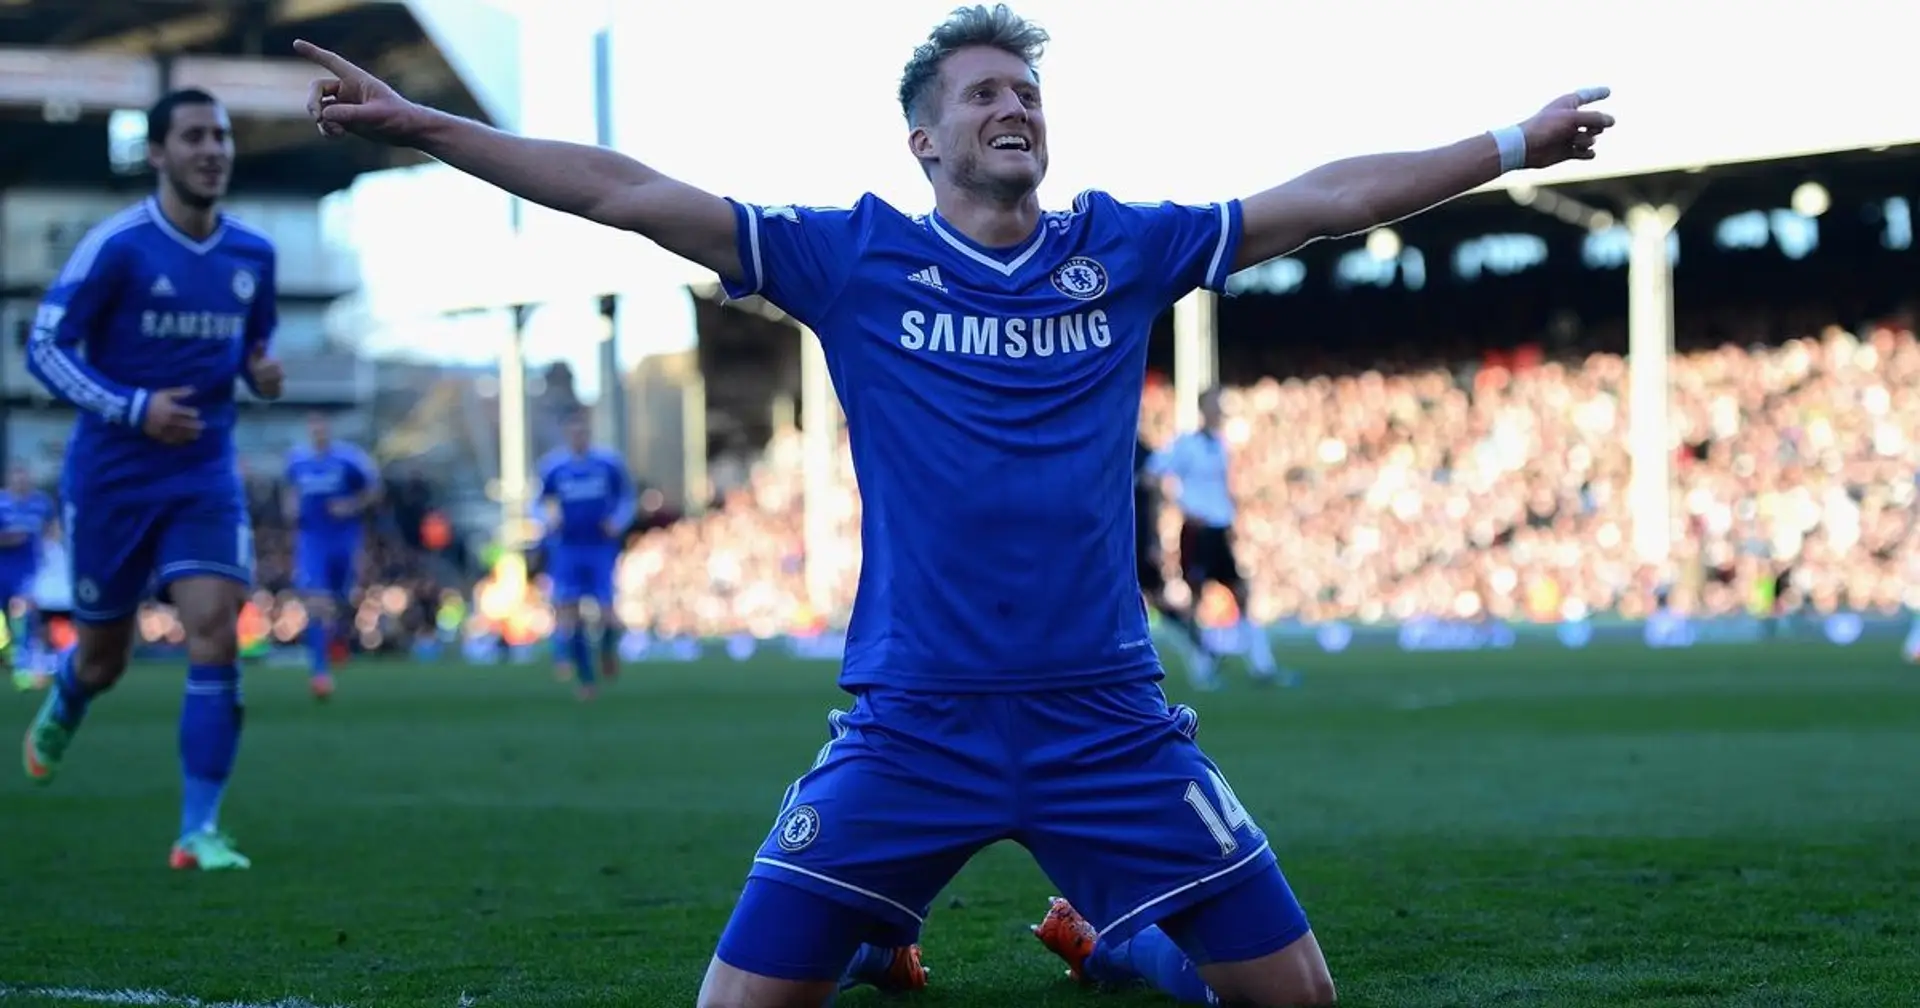 Relive Andre Schurrle's 16-minute hat-trick against Fulham ahead of weekend clash (video)